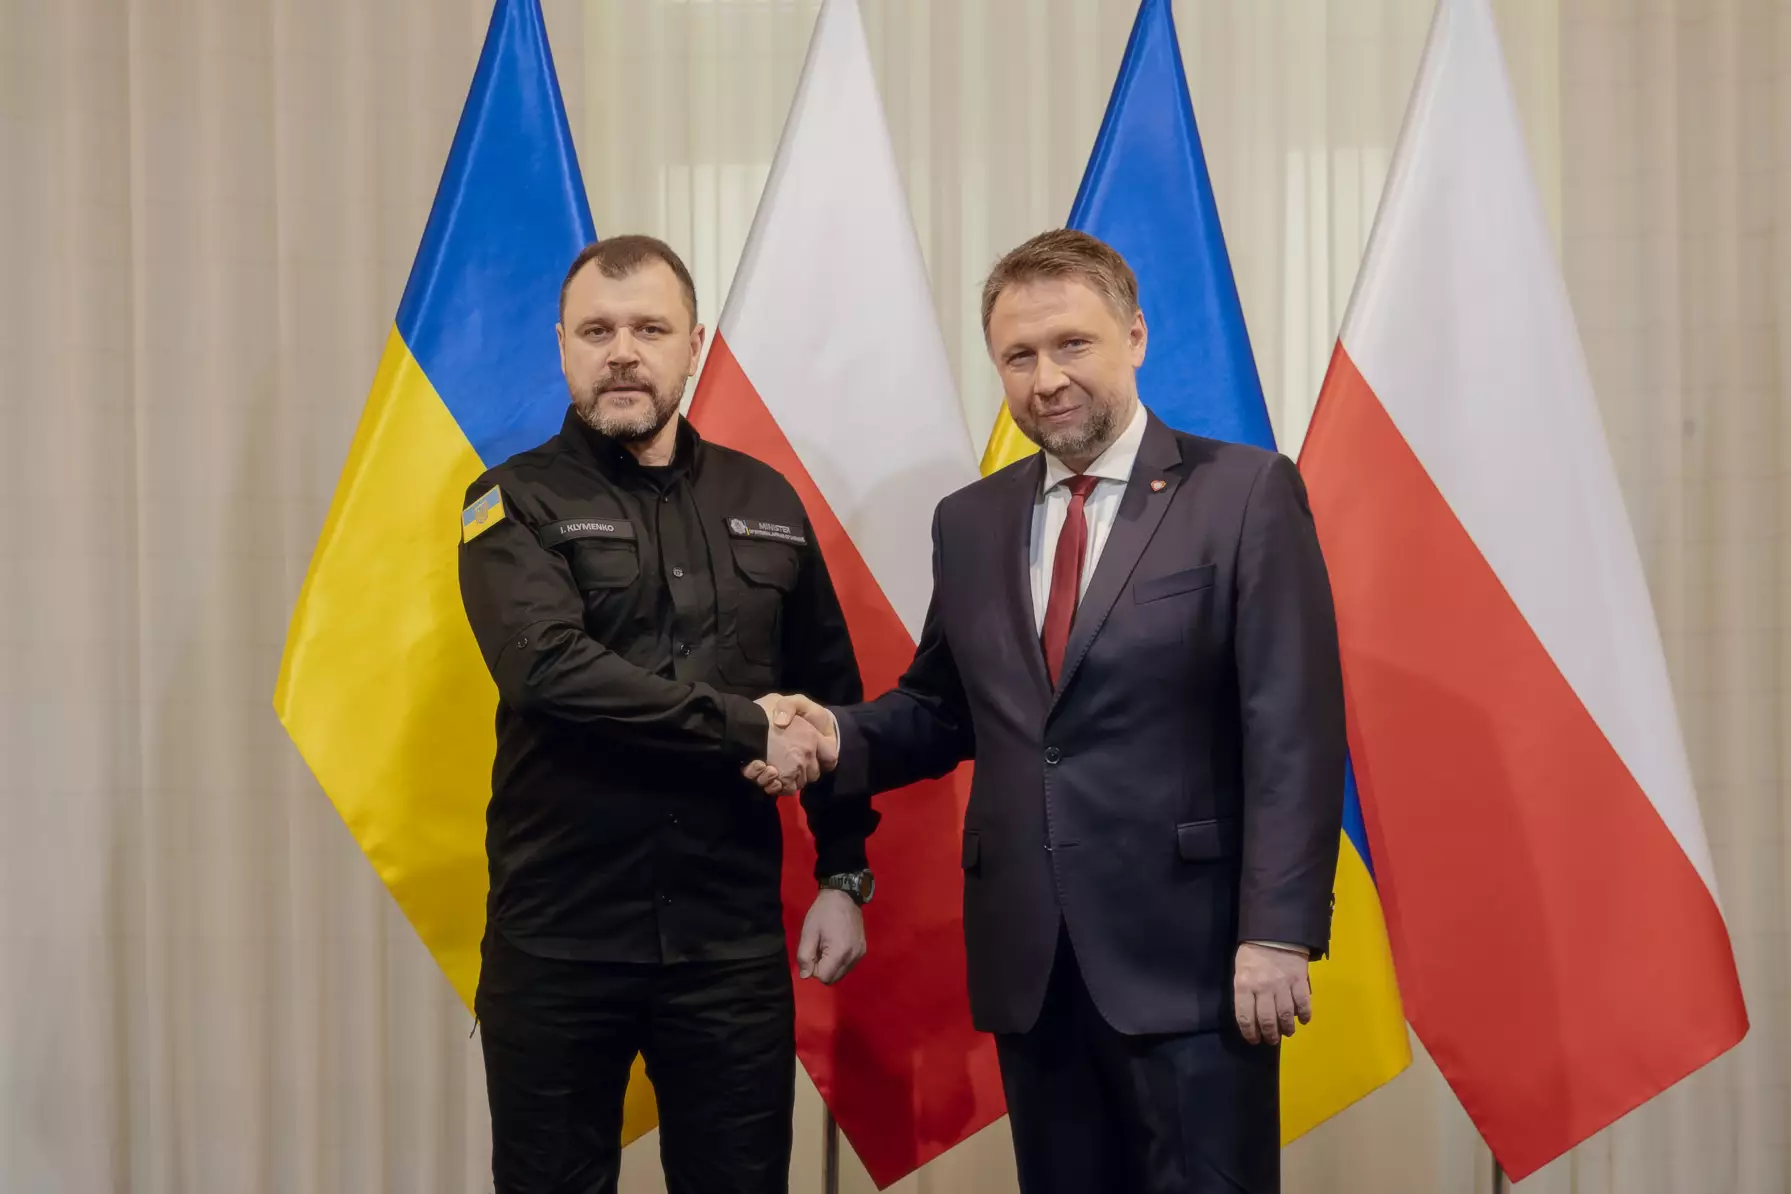 Ihor Klymenko met with the Minister of Internal Affairs and Administration of Poland, Marcin Kerwinski